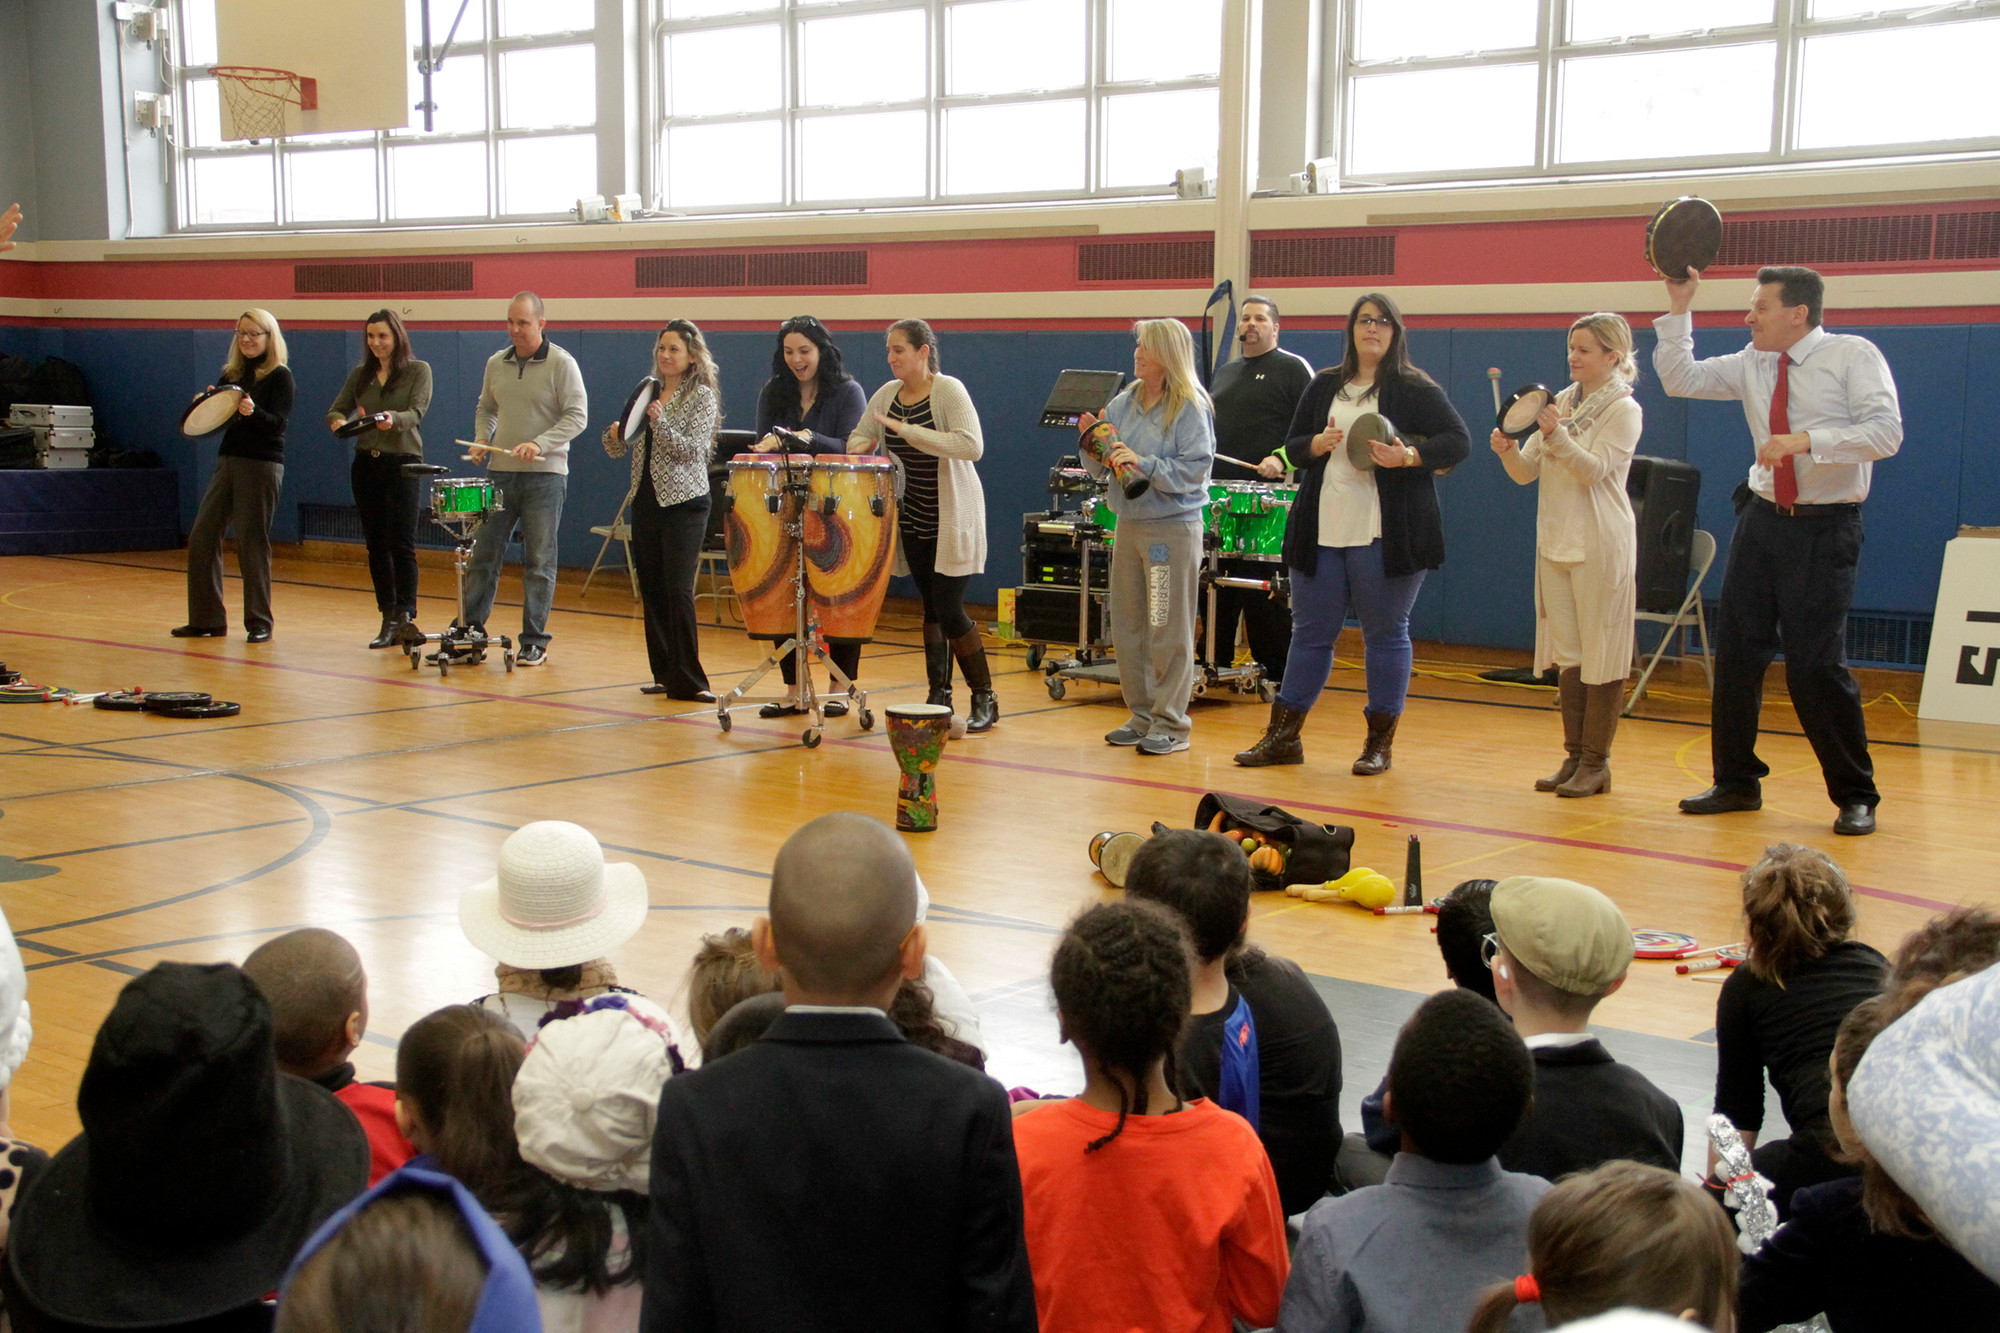 Teachers at the May Lane school played drums during the festive celebration.